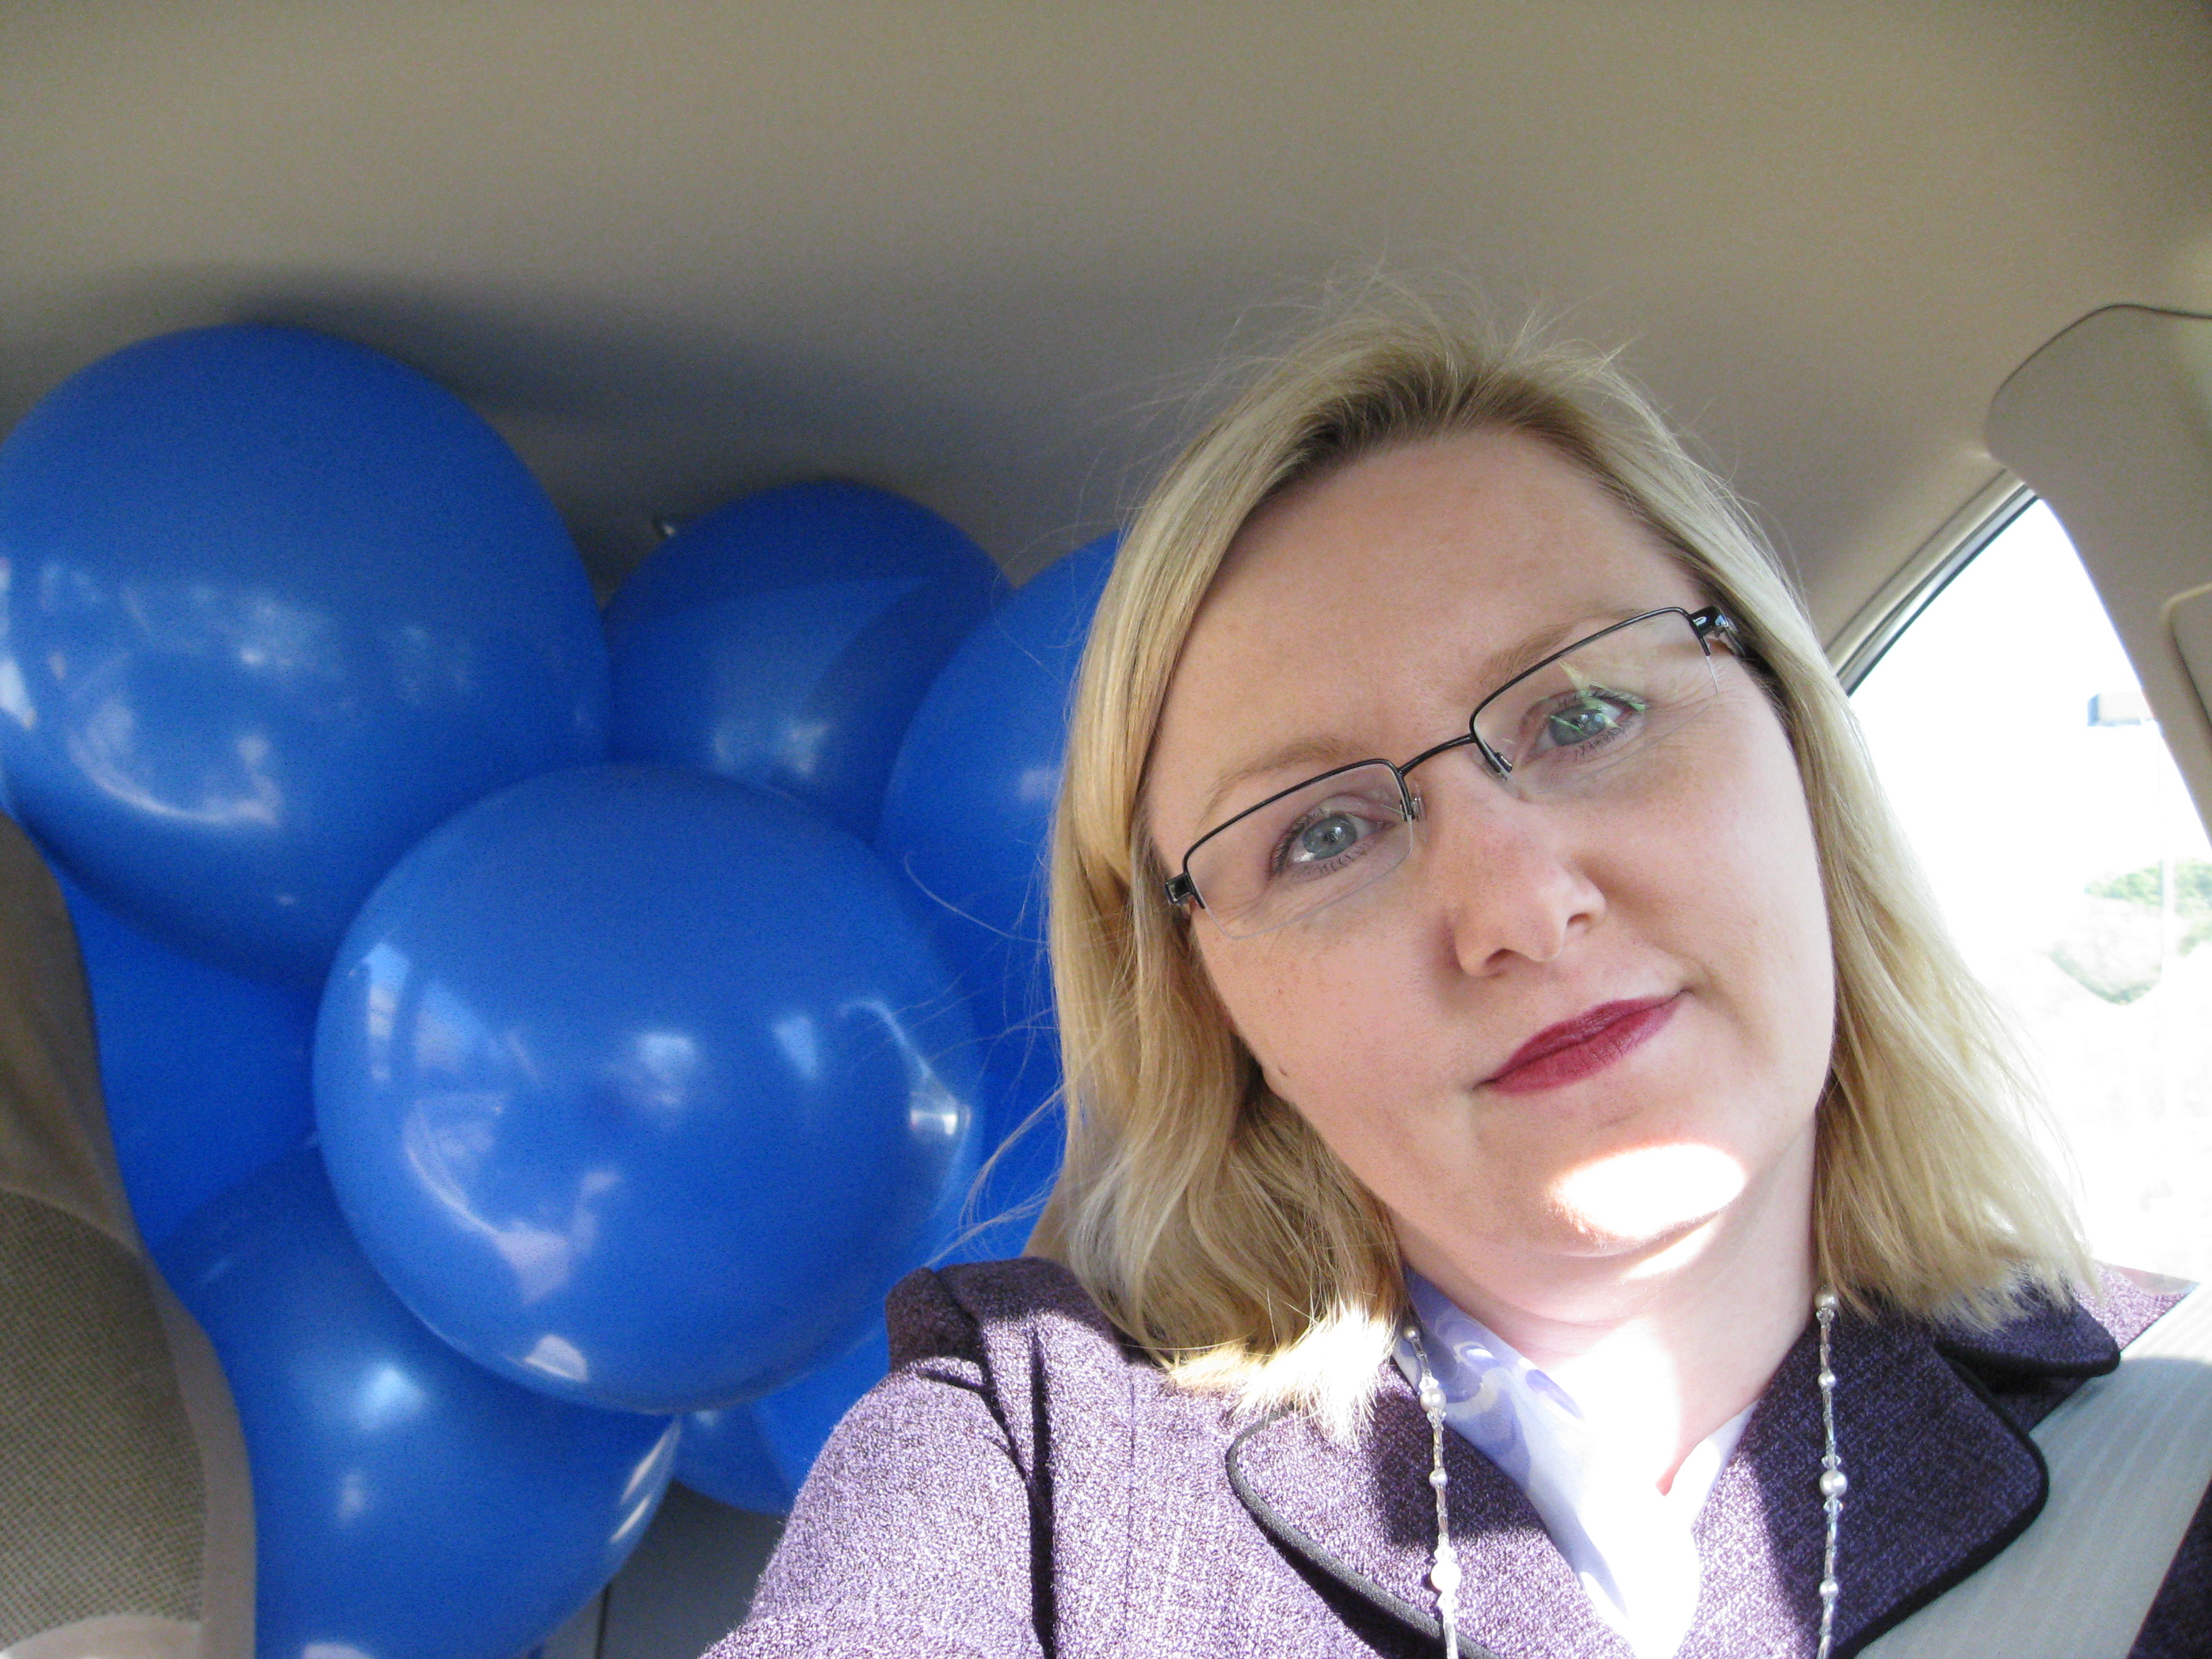 Me in my clown car. Awesome!